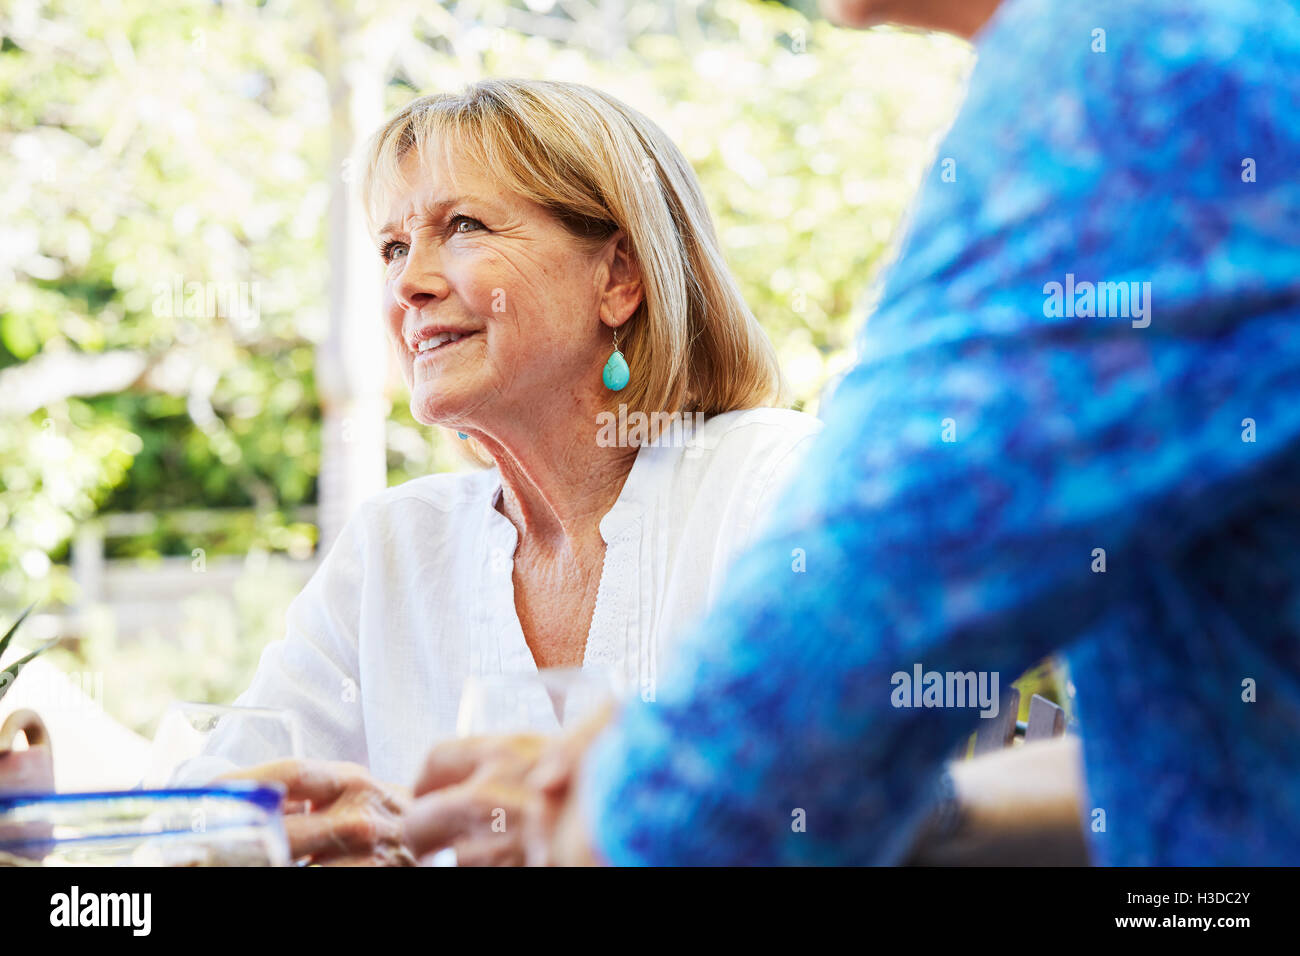 An attractive mature woman smiling and looking up at a companion. Stock Photo